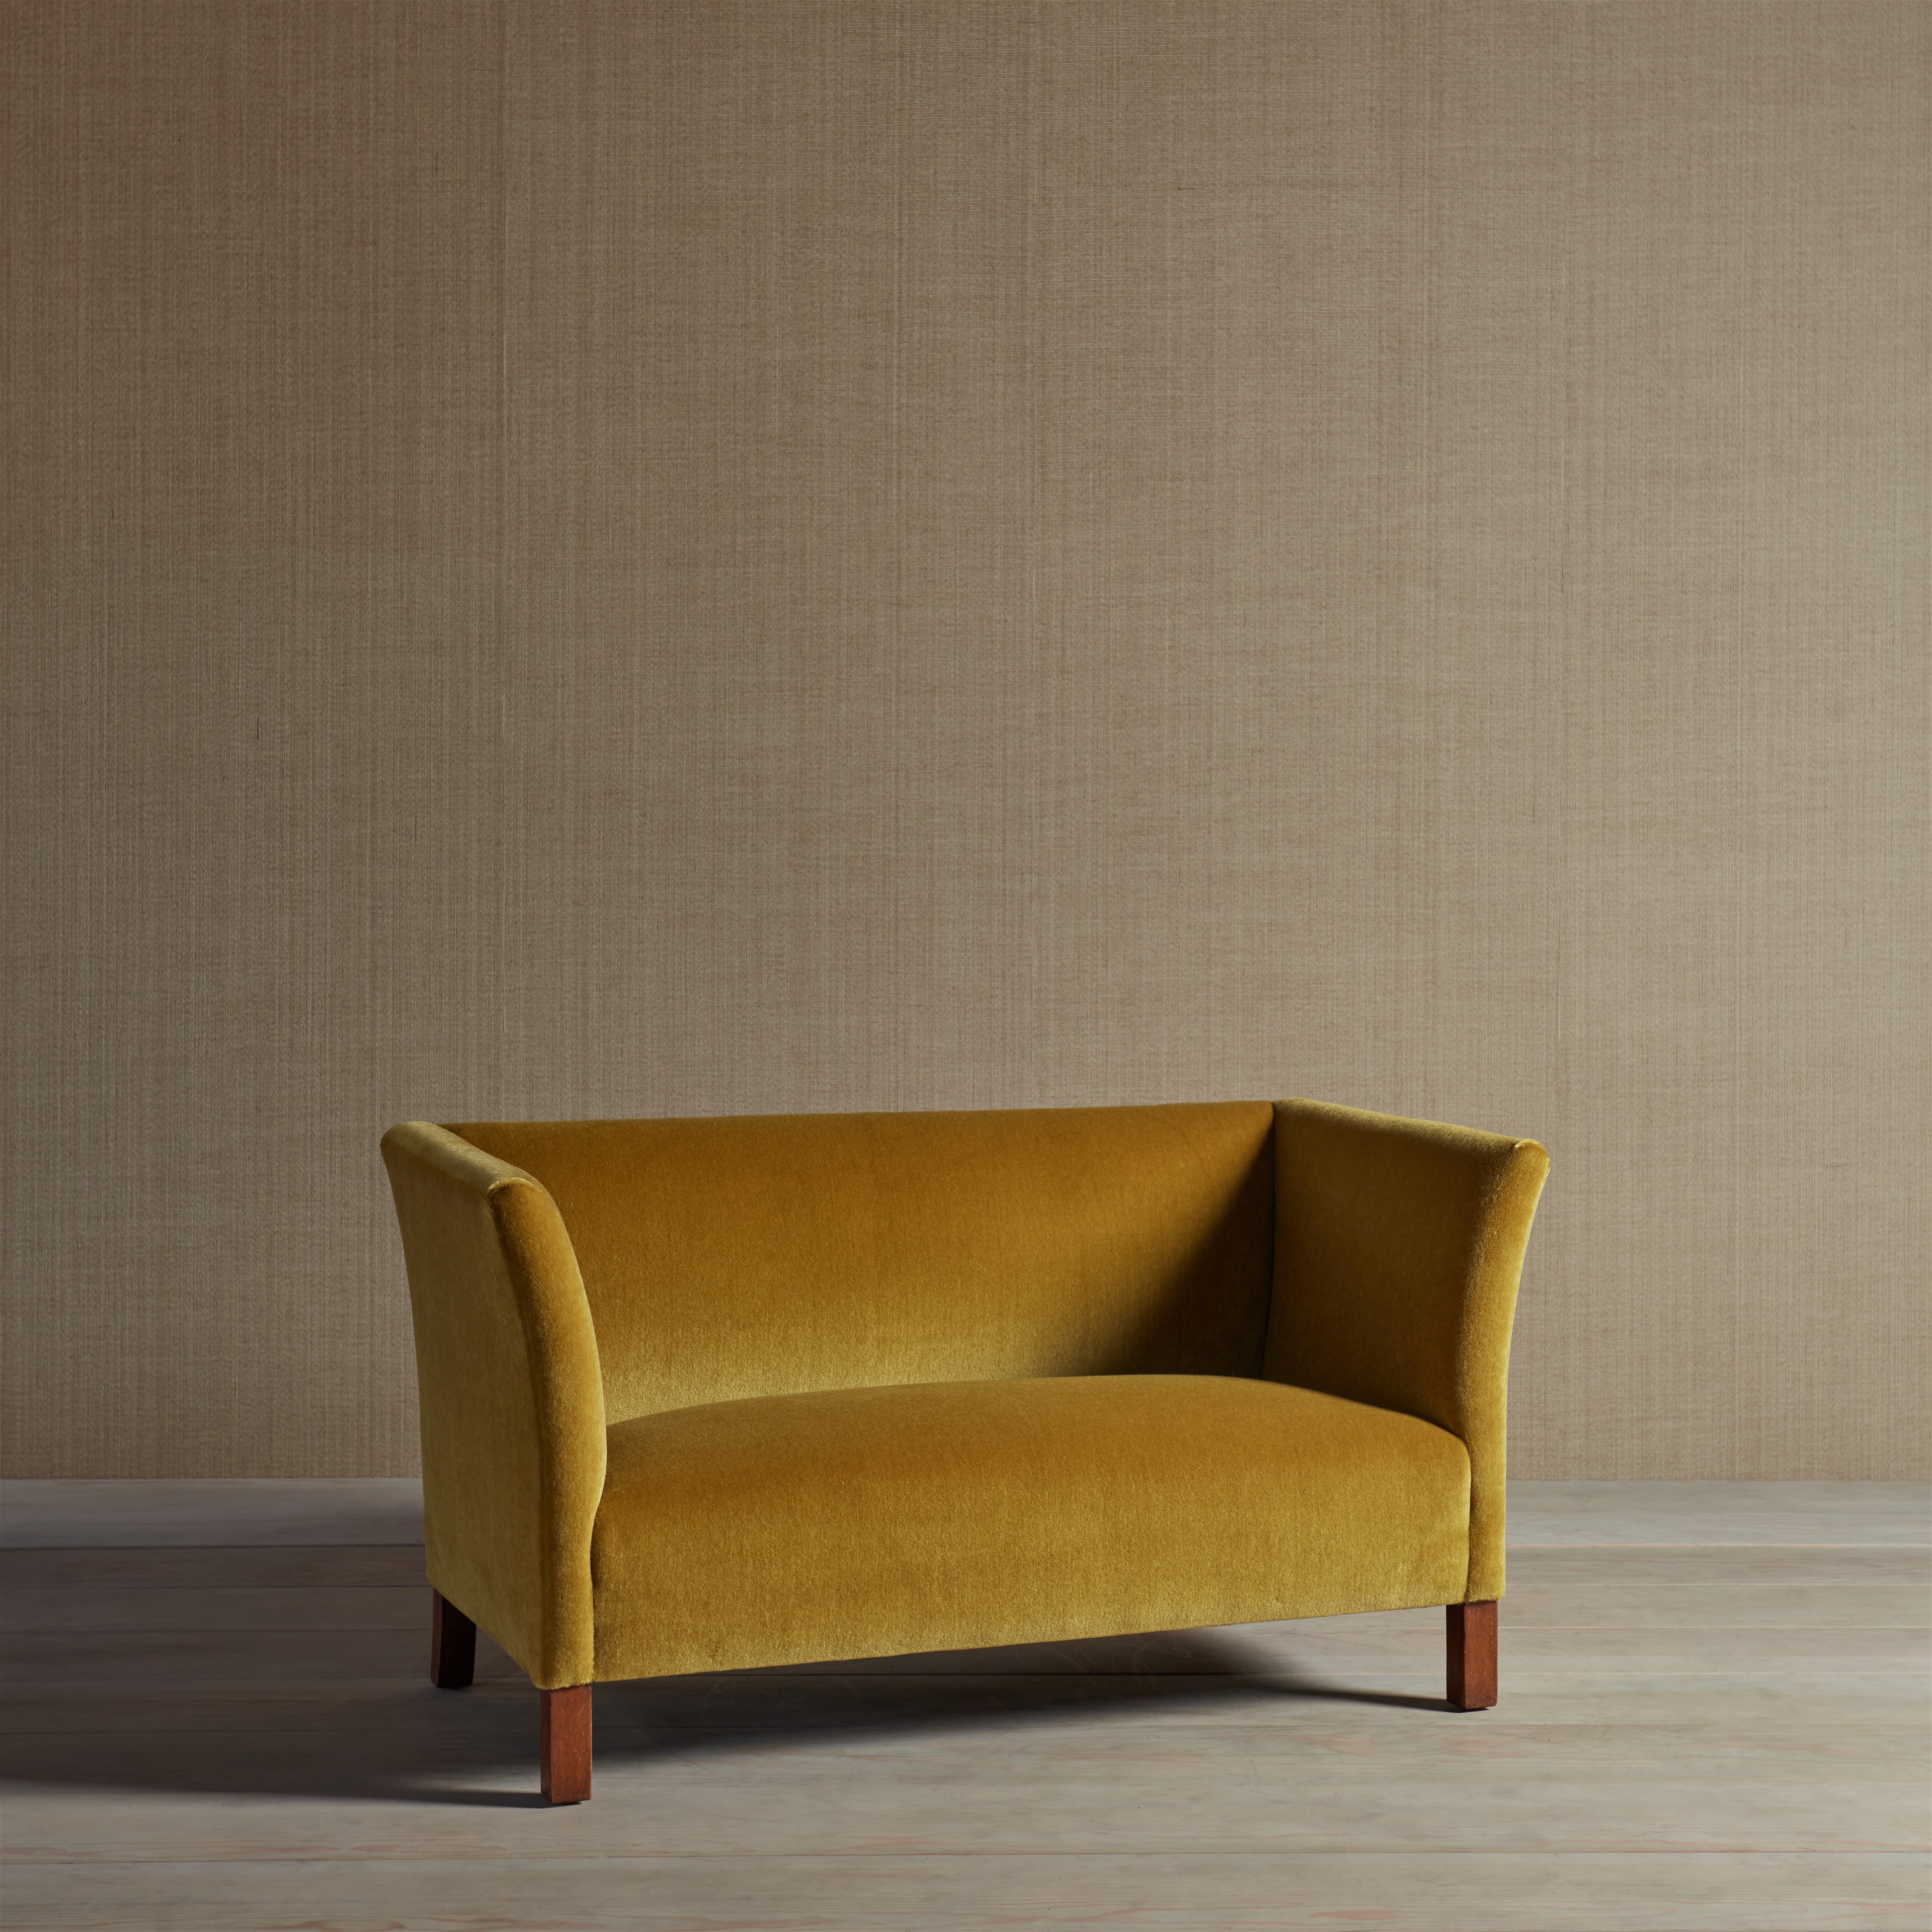 The image of an Mid-Century Modern Settee product